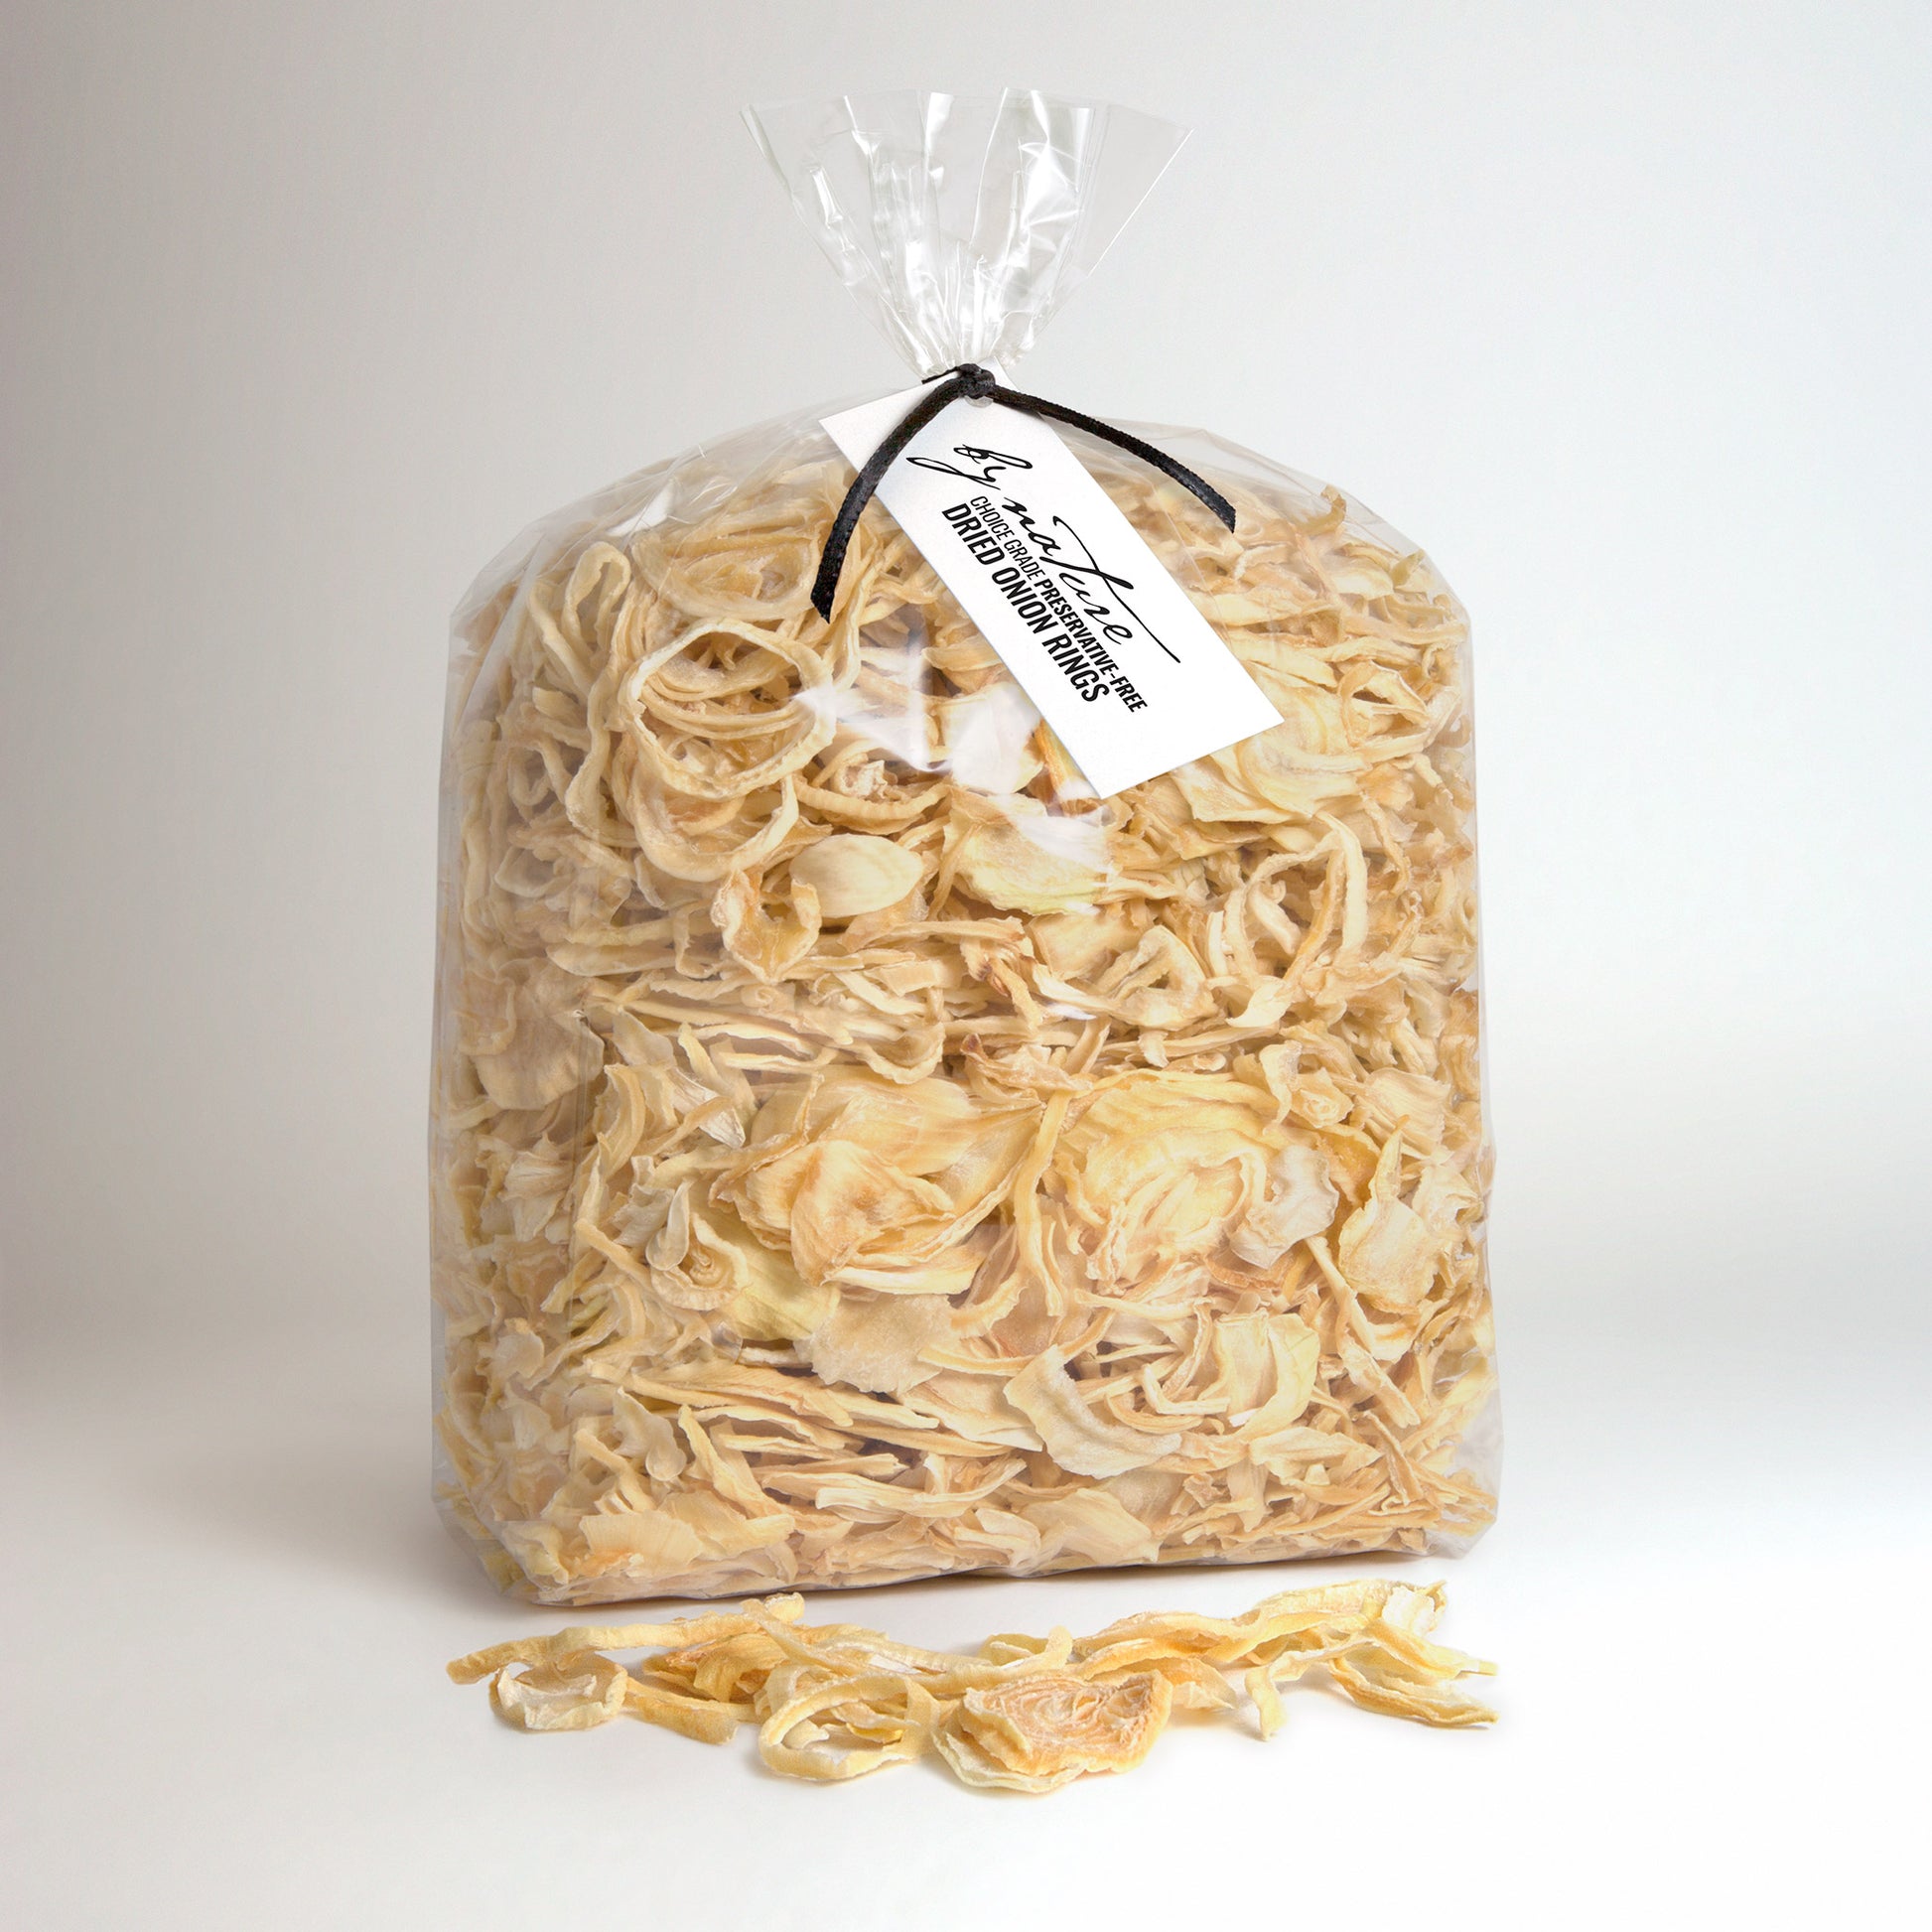 BY NATURE Dried Onion Rings, 500g - preservative-free.